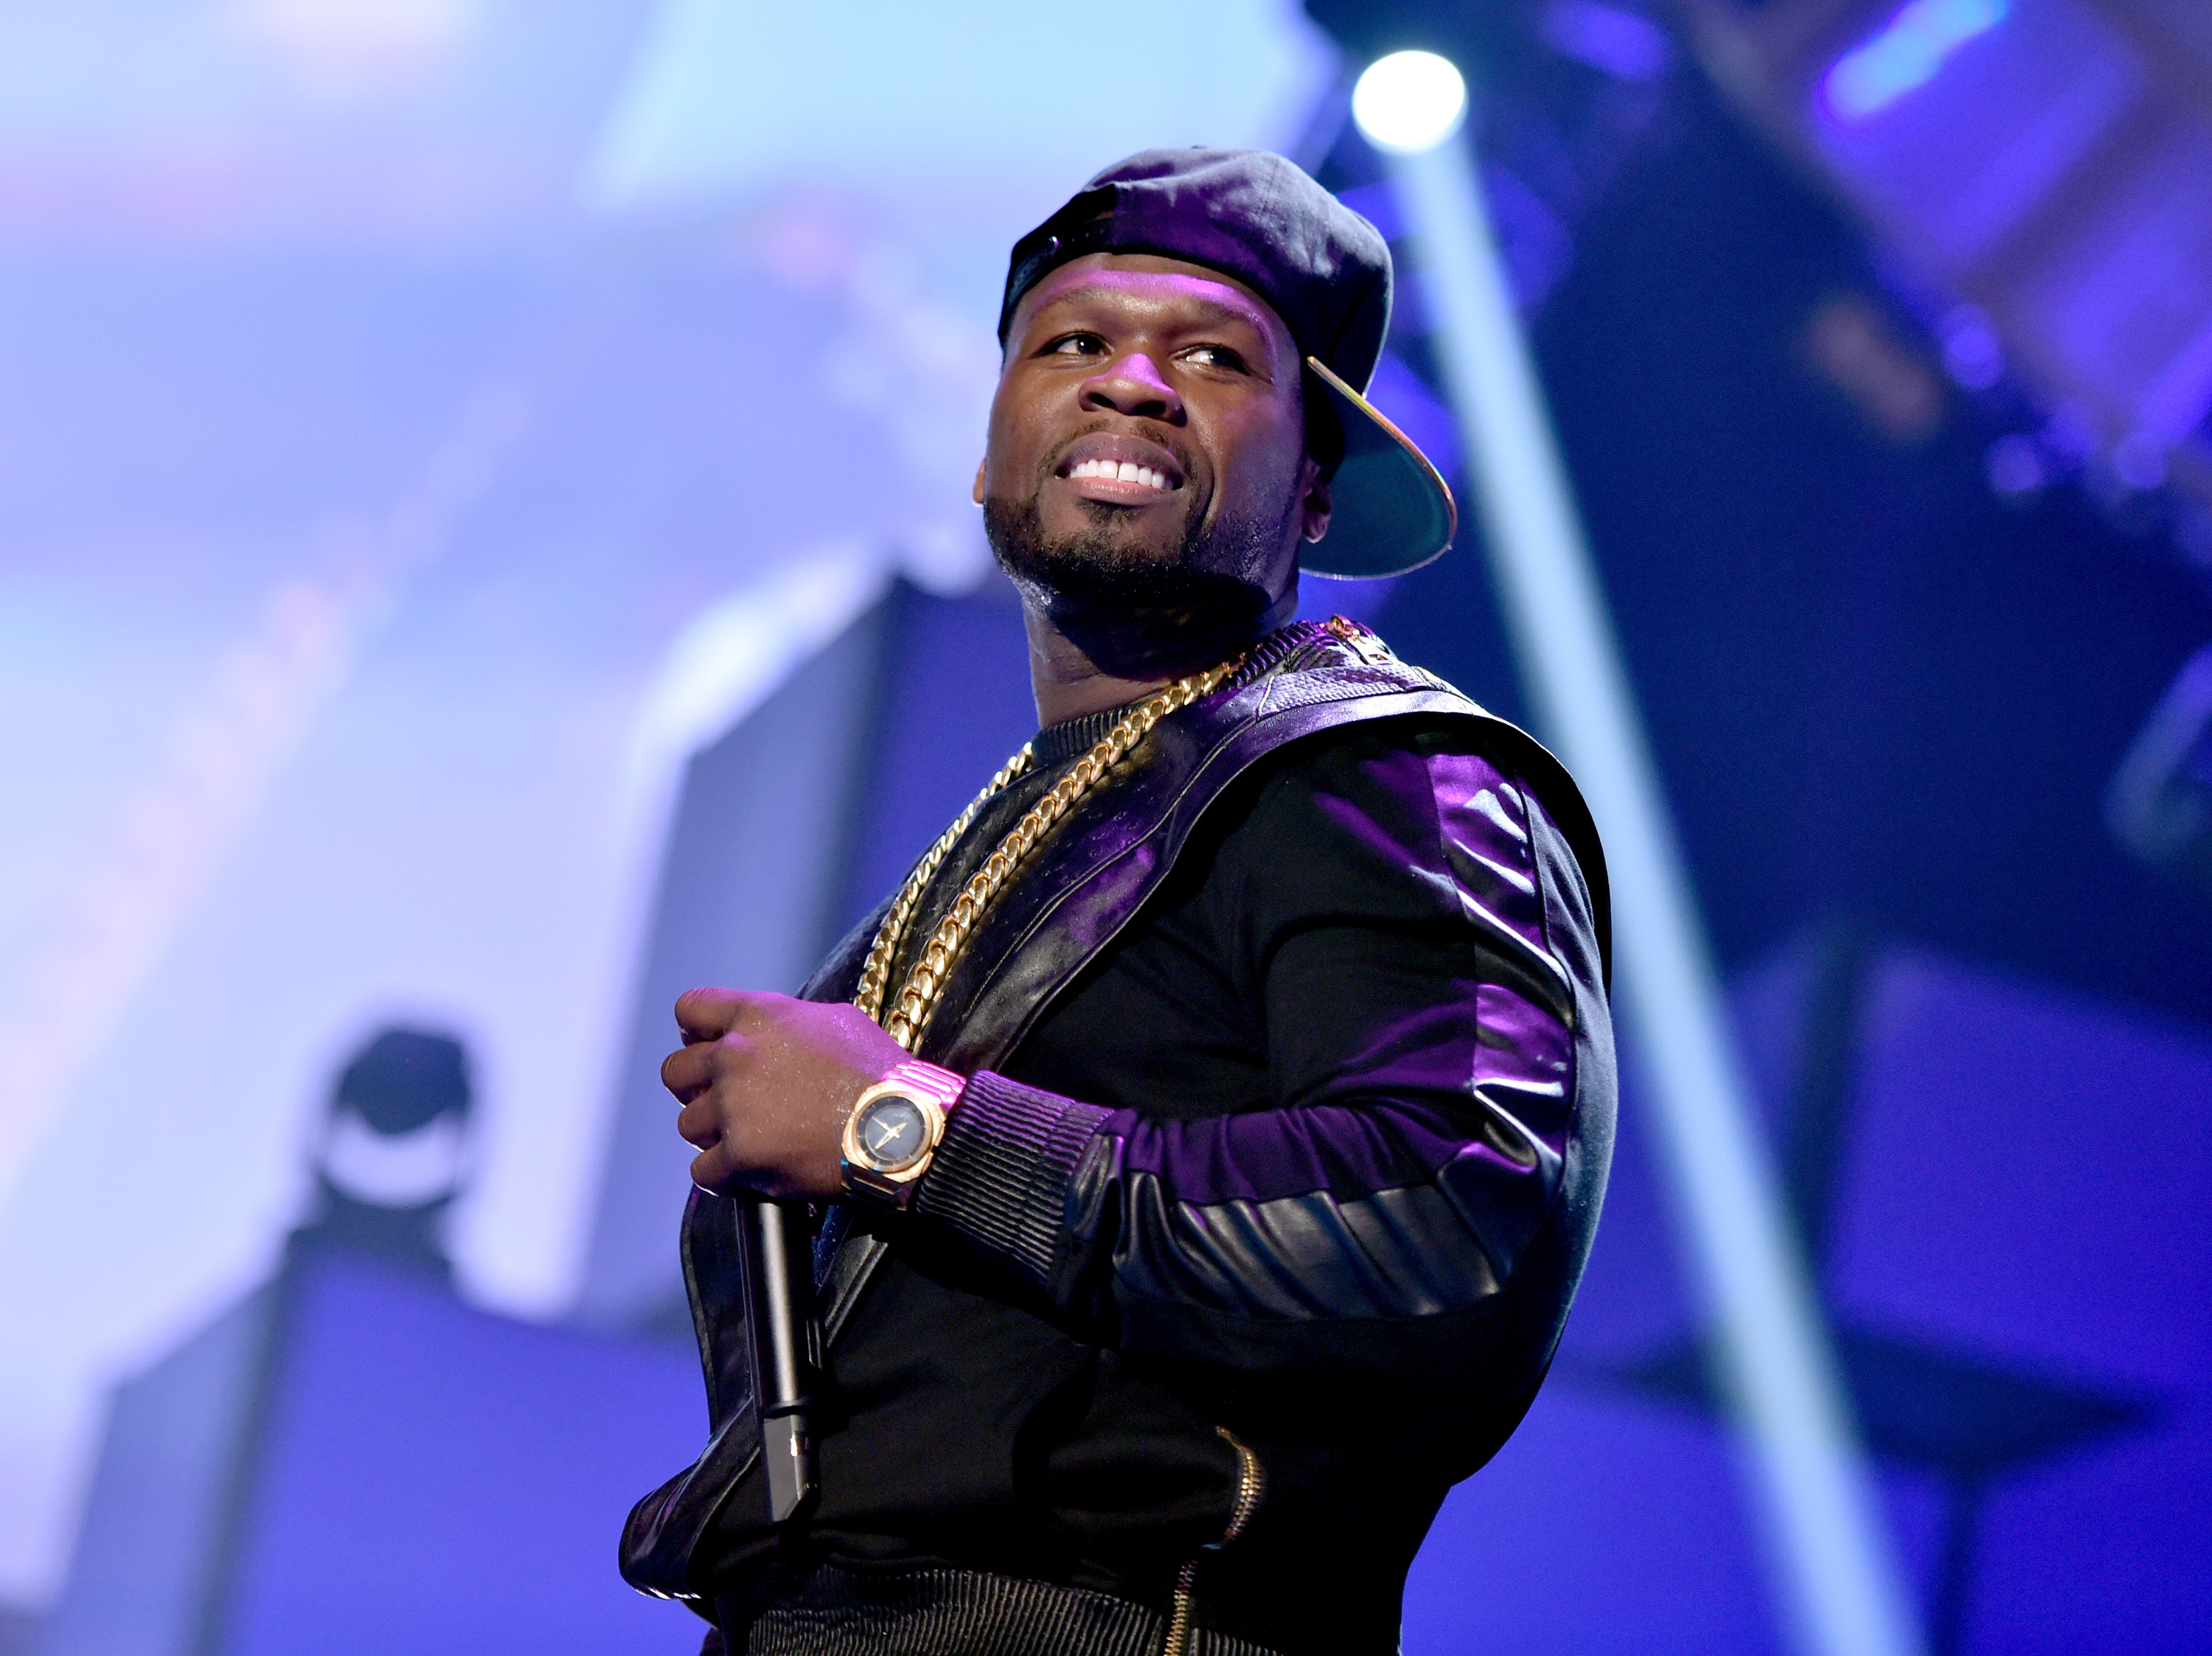 50 Cent wearing a hat